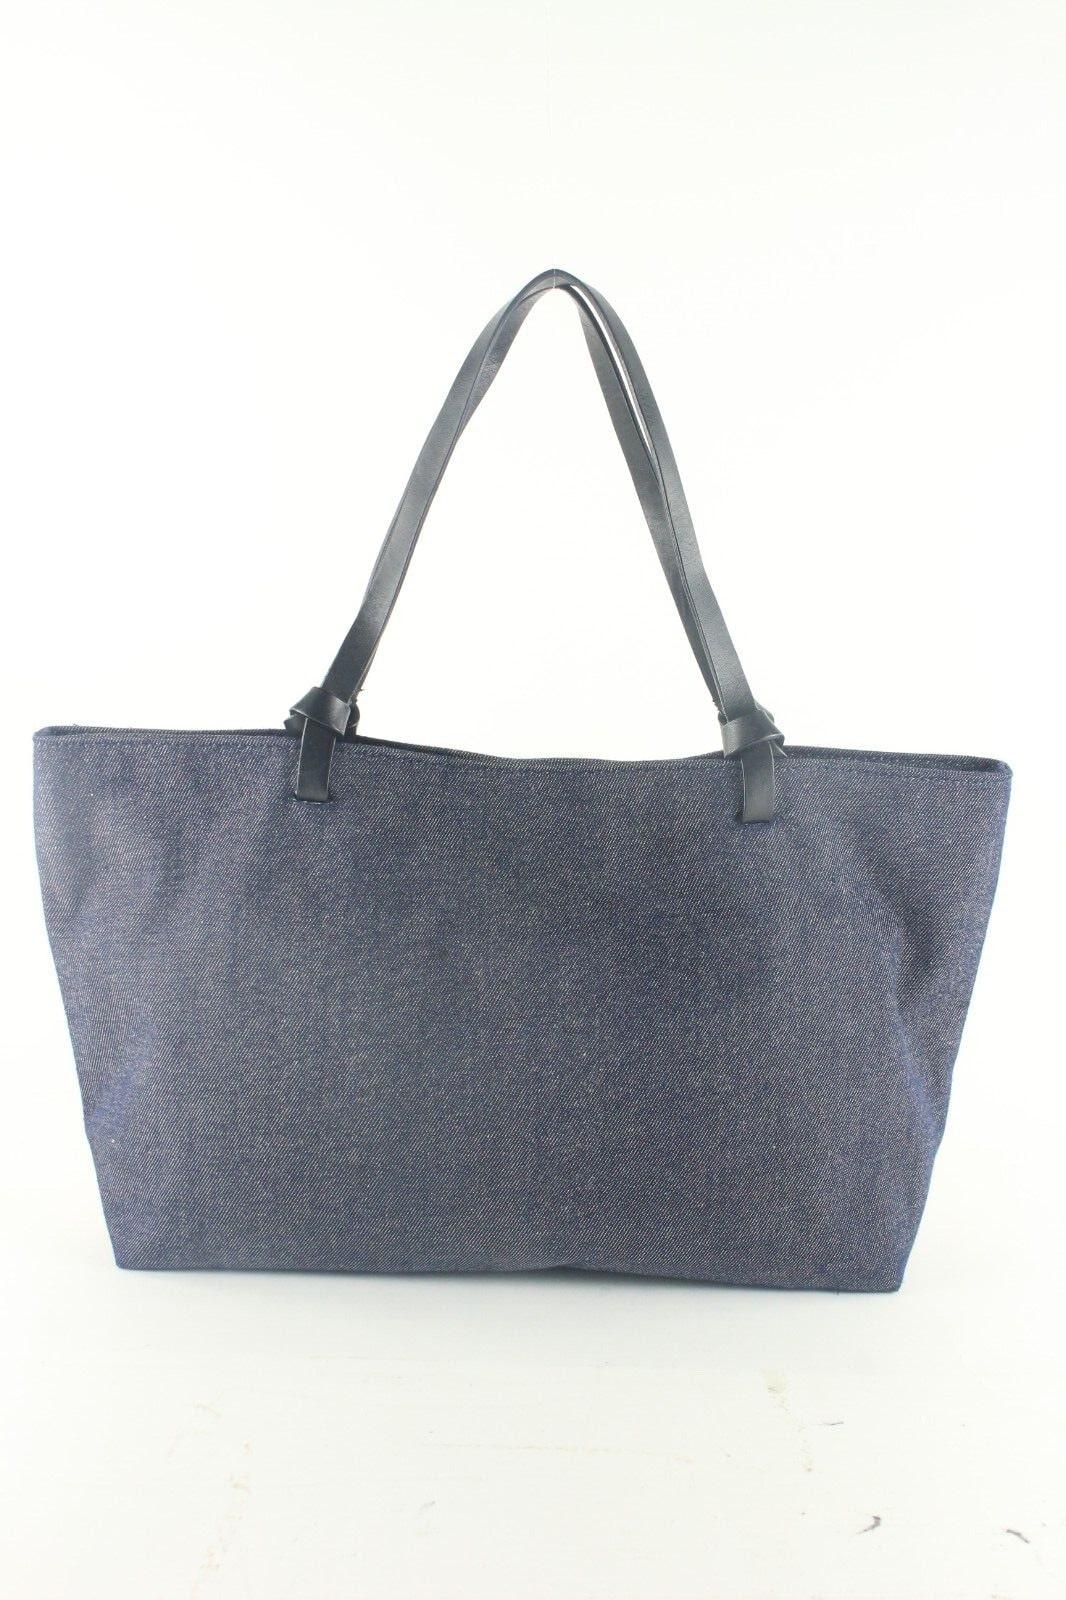 Givenchy Denim Tote 2GV926K In Good Condition For Sale In Dix hills, NY